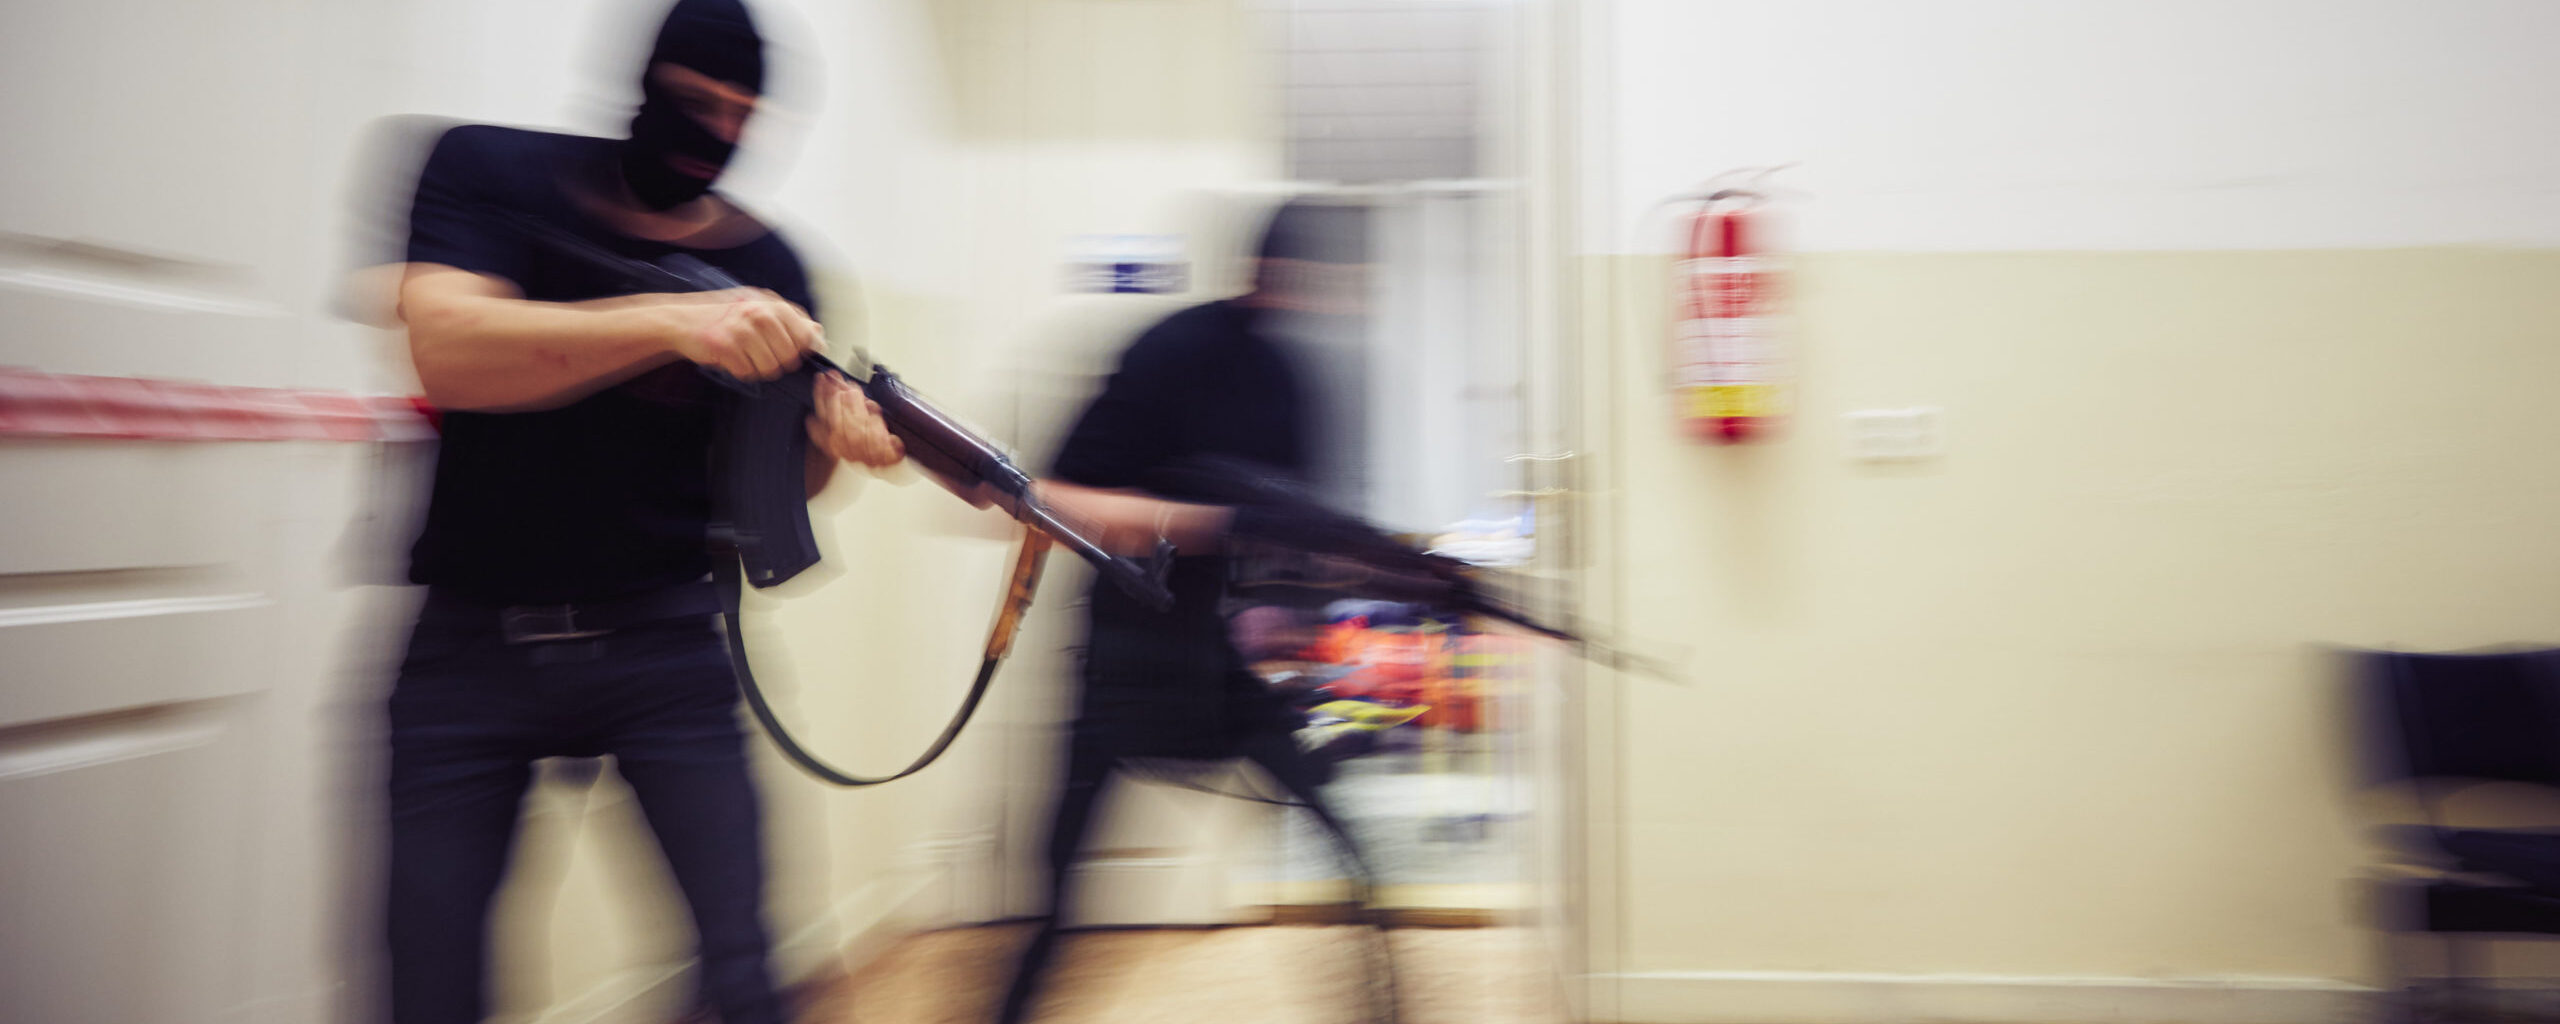 How to Prepare for an Active Shooter